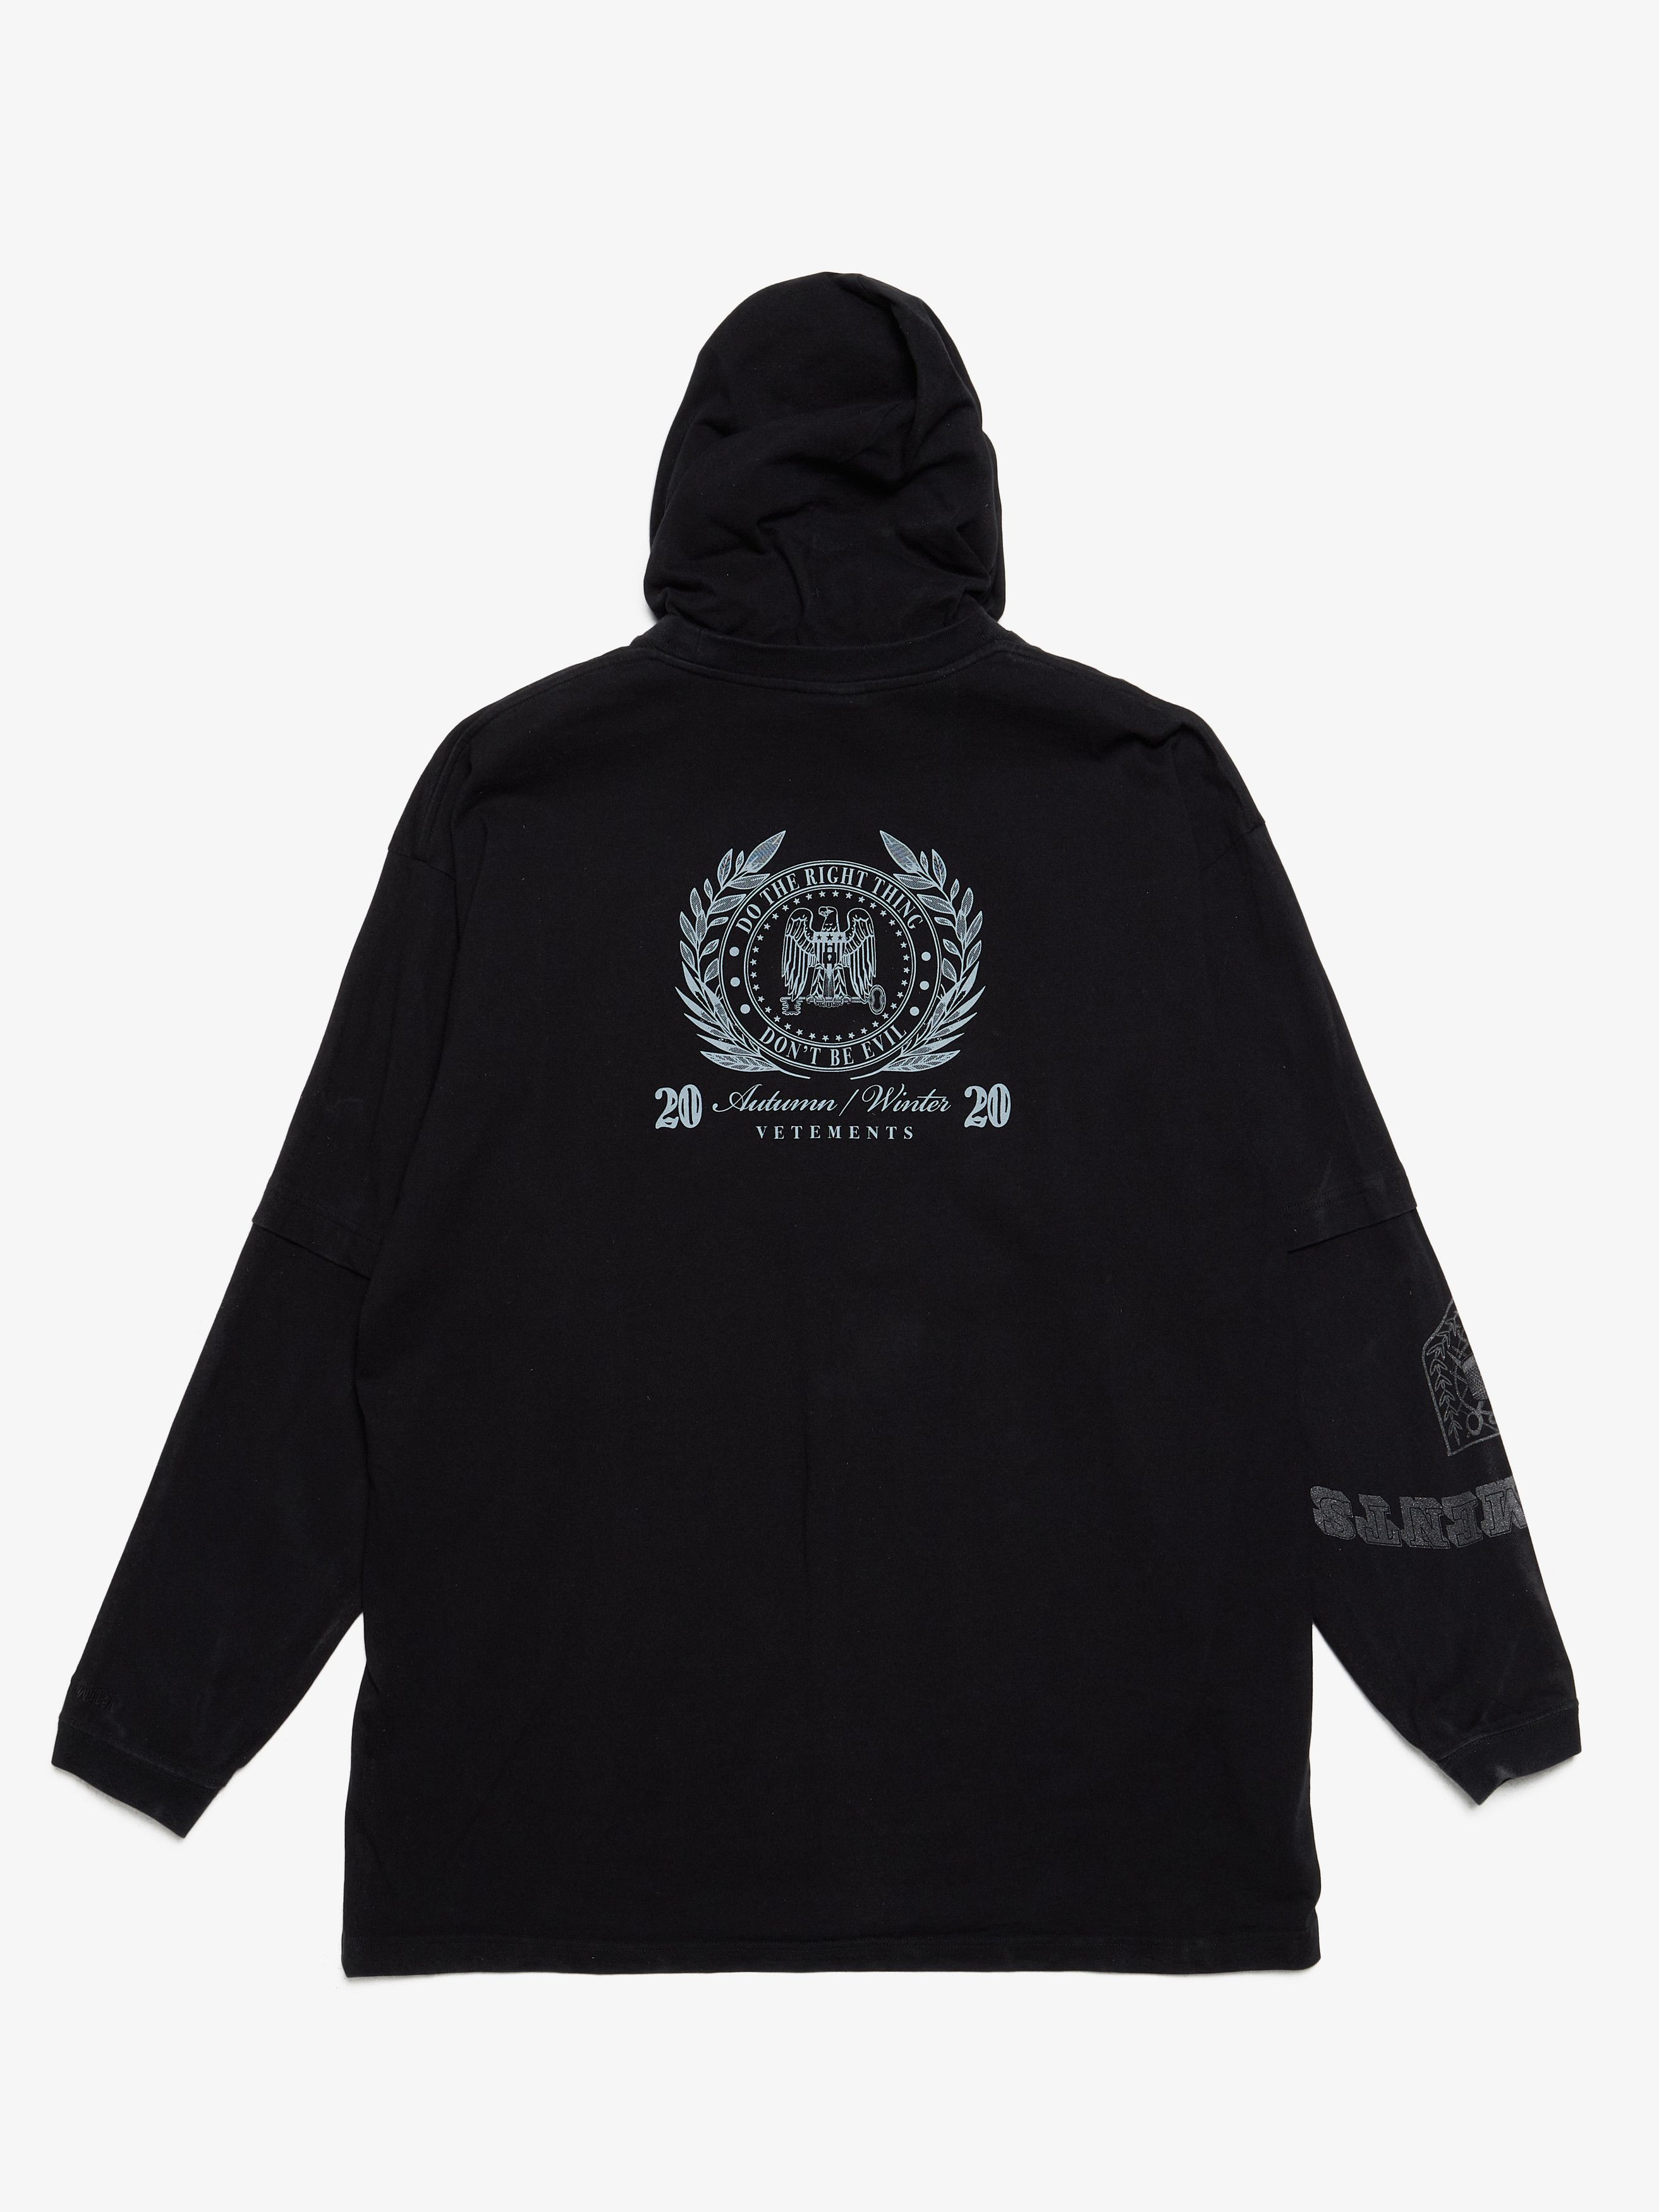 Vetements AW20 The President Black Jersey Hoodie Size US M / EU 48-50 / 2 - 2 Preview